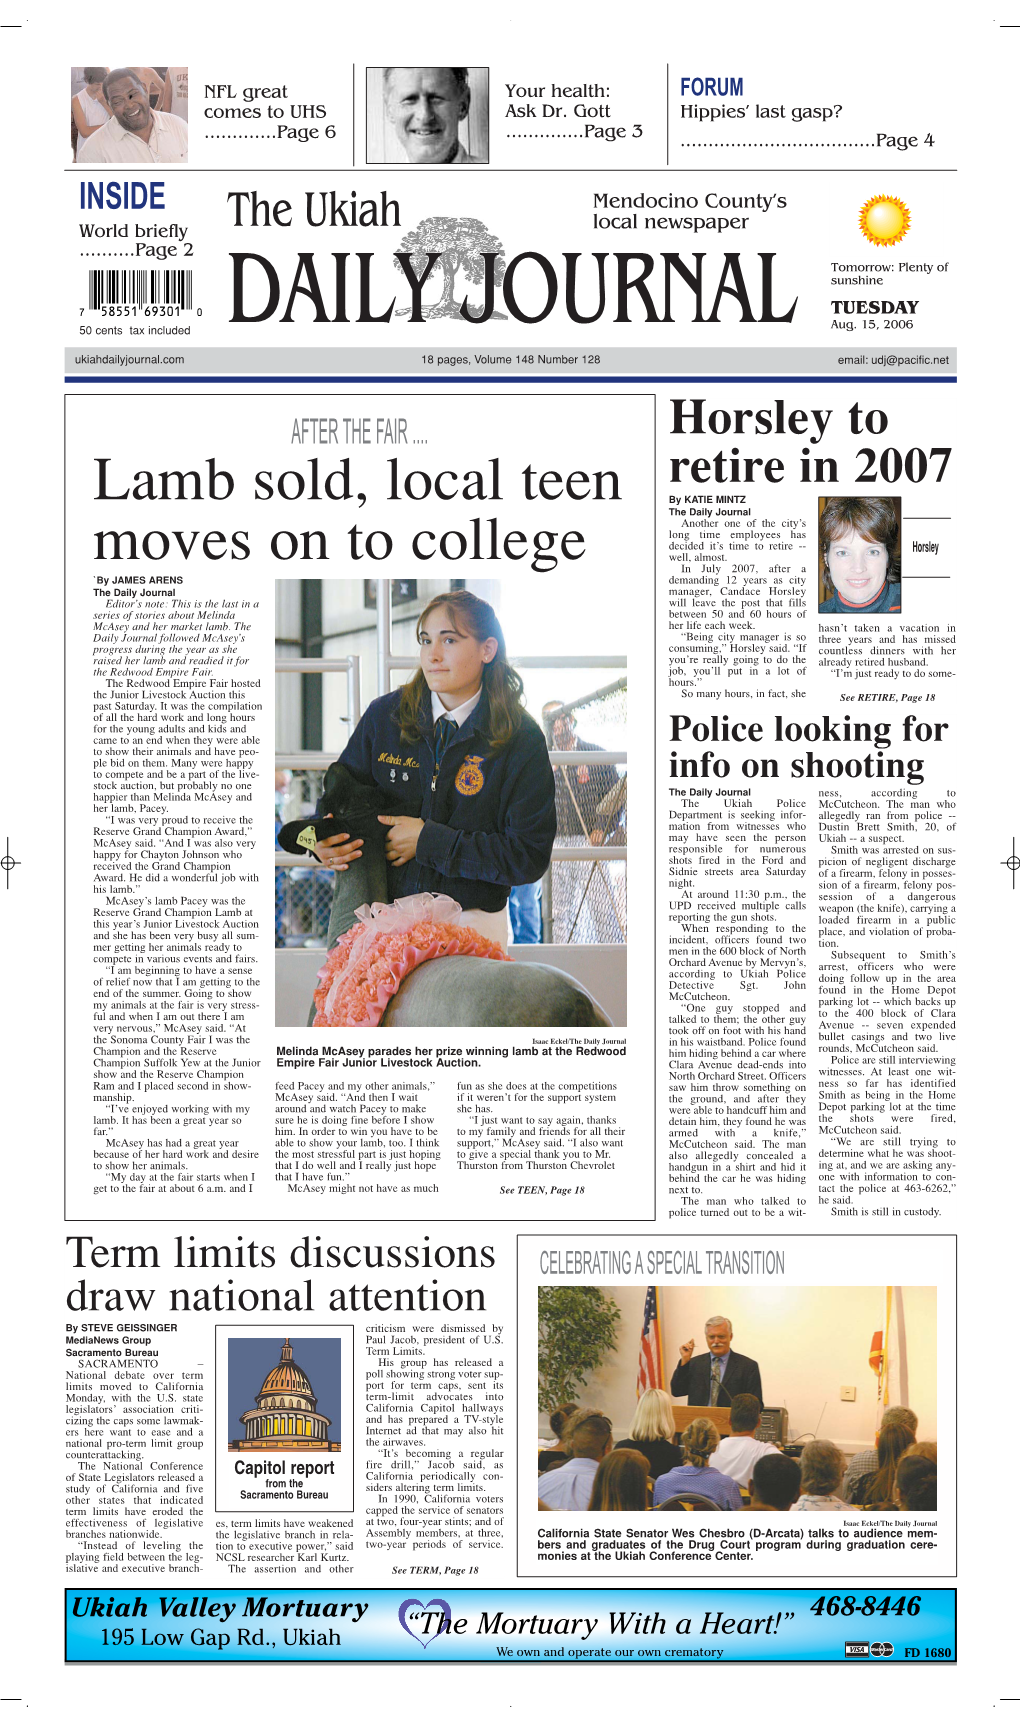 Lamb Sold, Local Teen Moves on to College